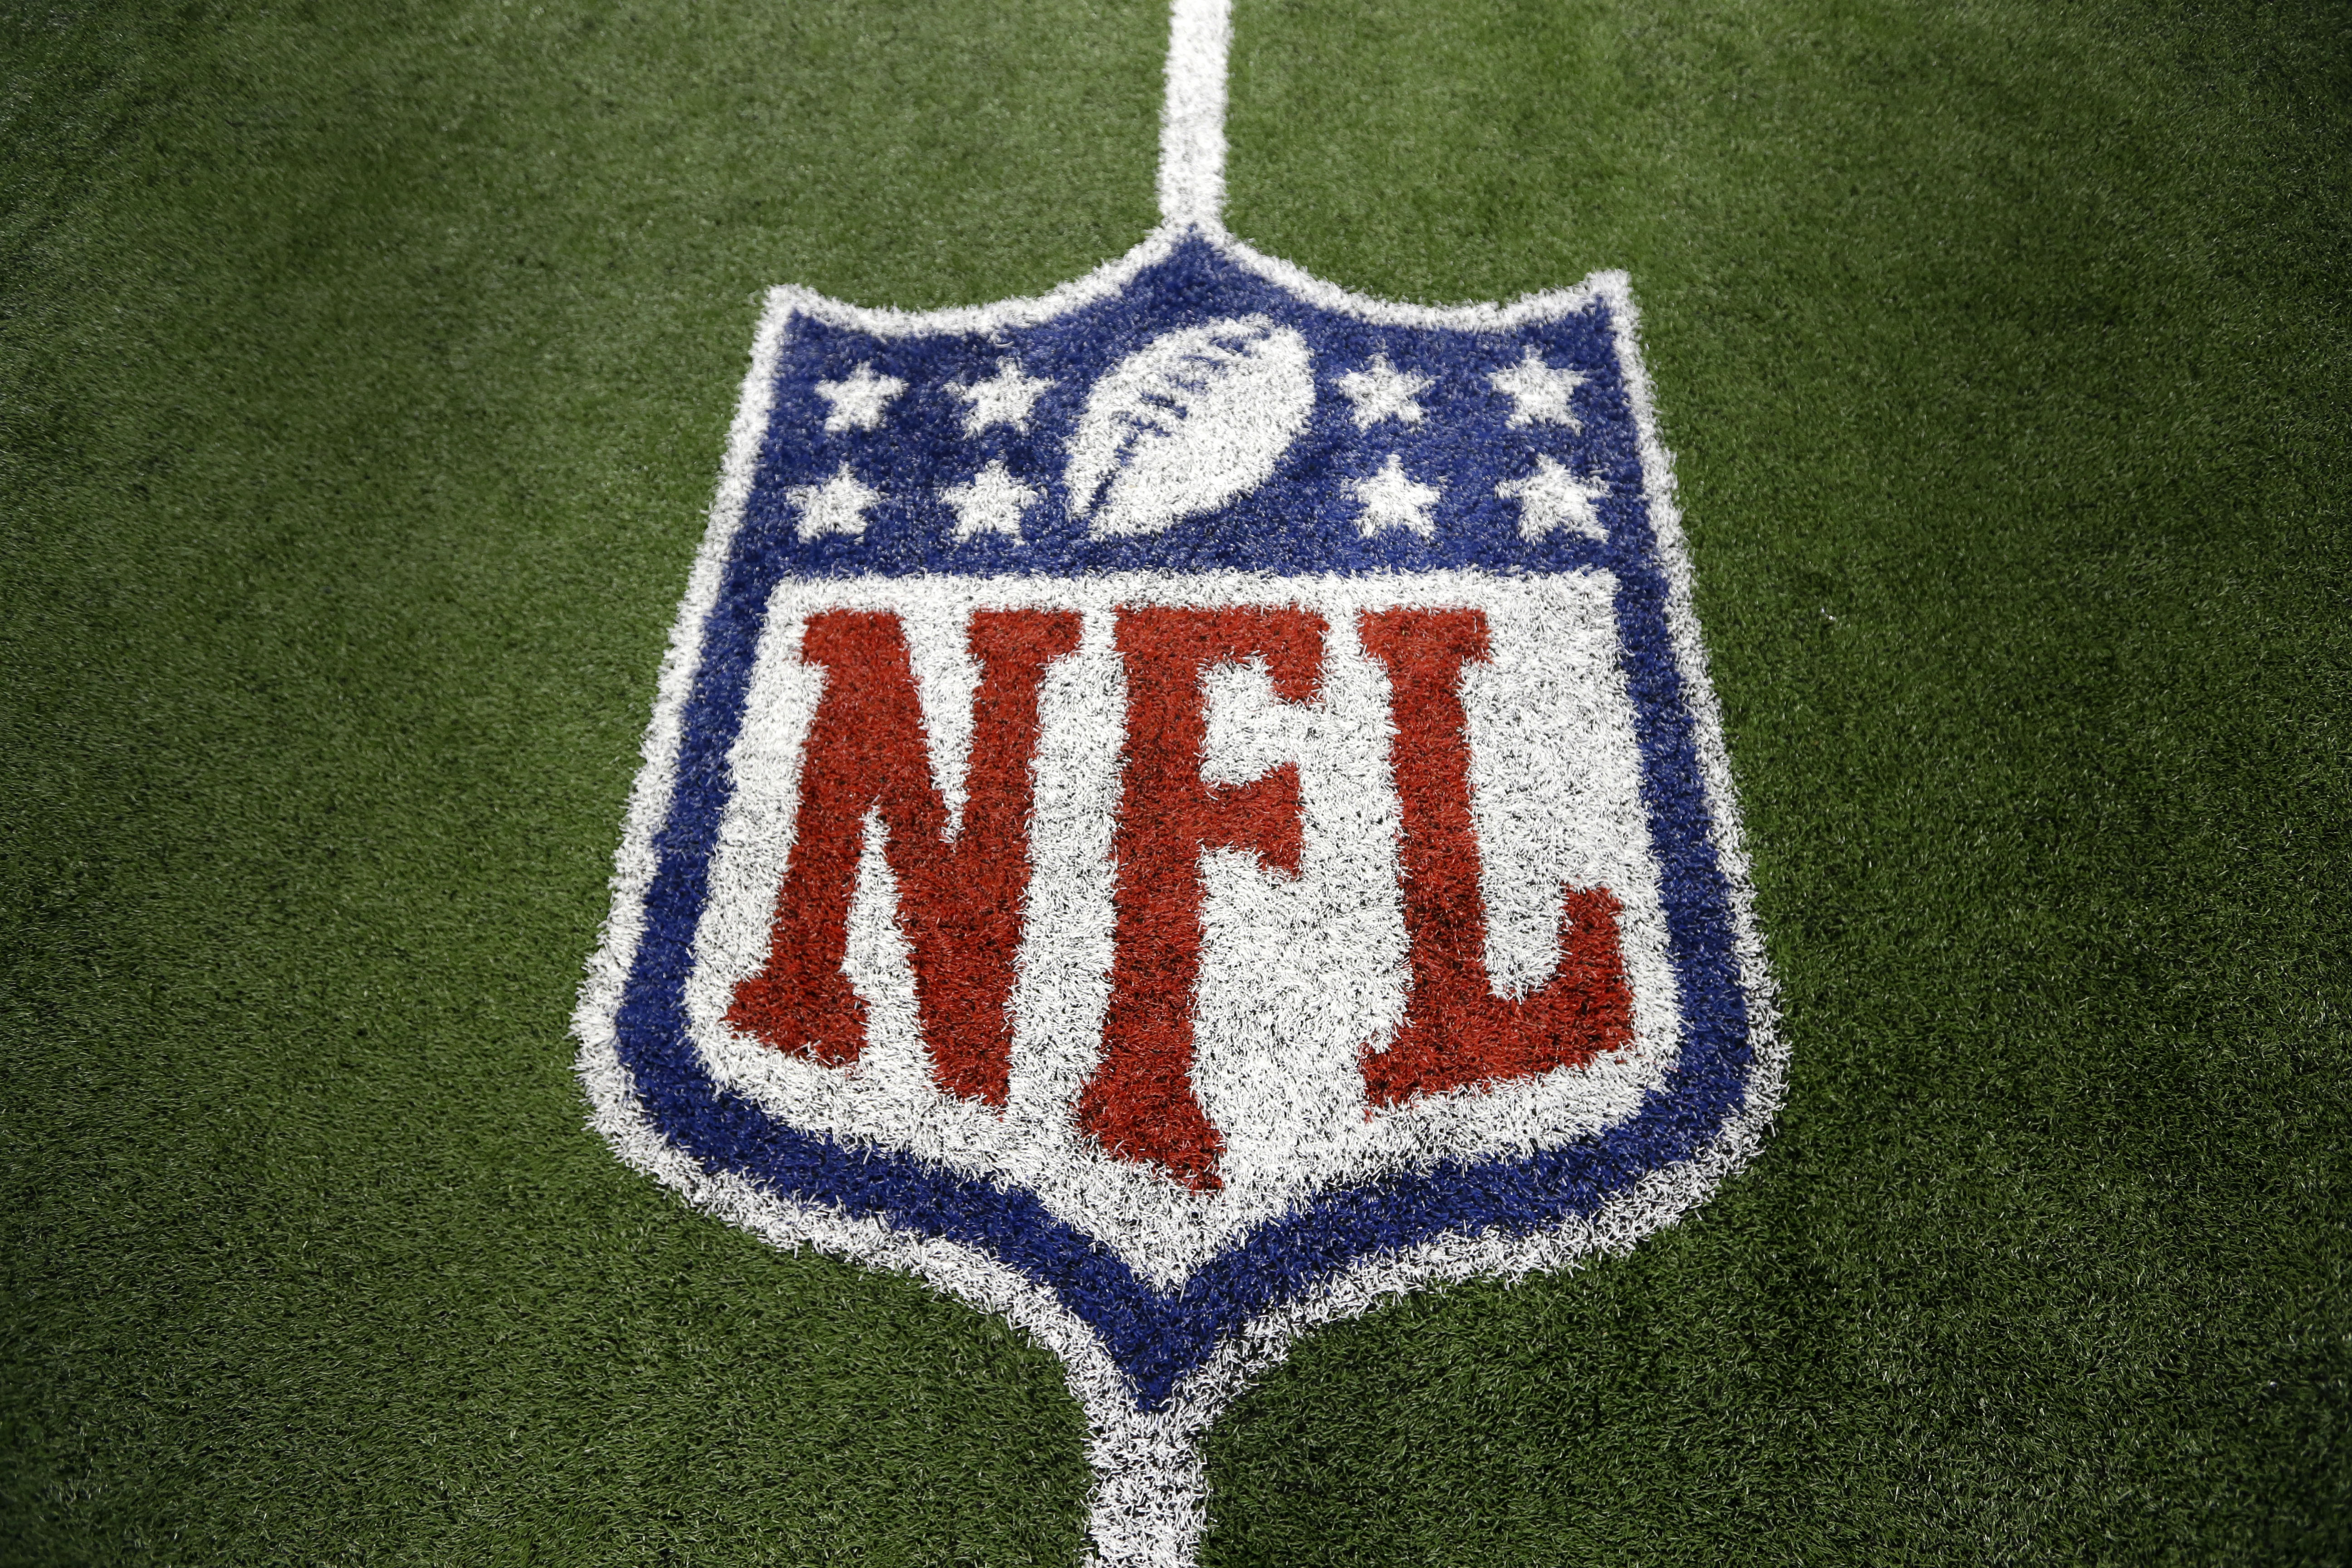 NFL Network and NFL RedZone will be offered direct to consumer on NFL+  service